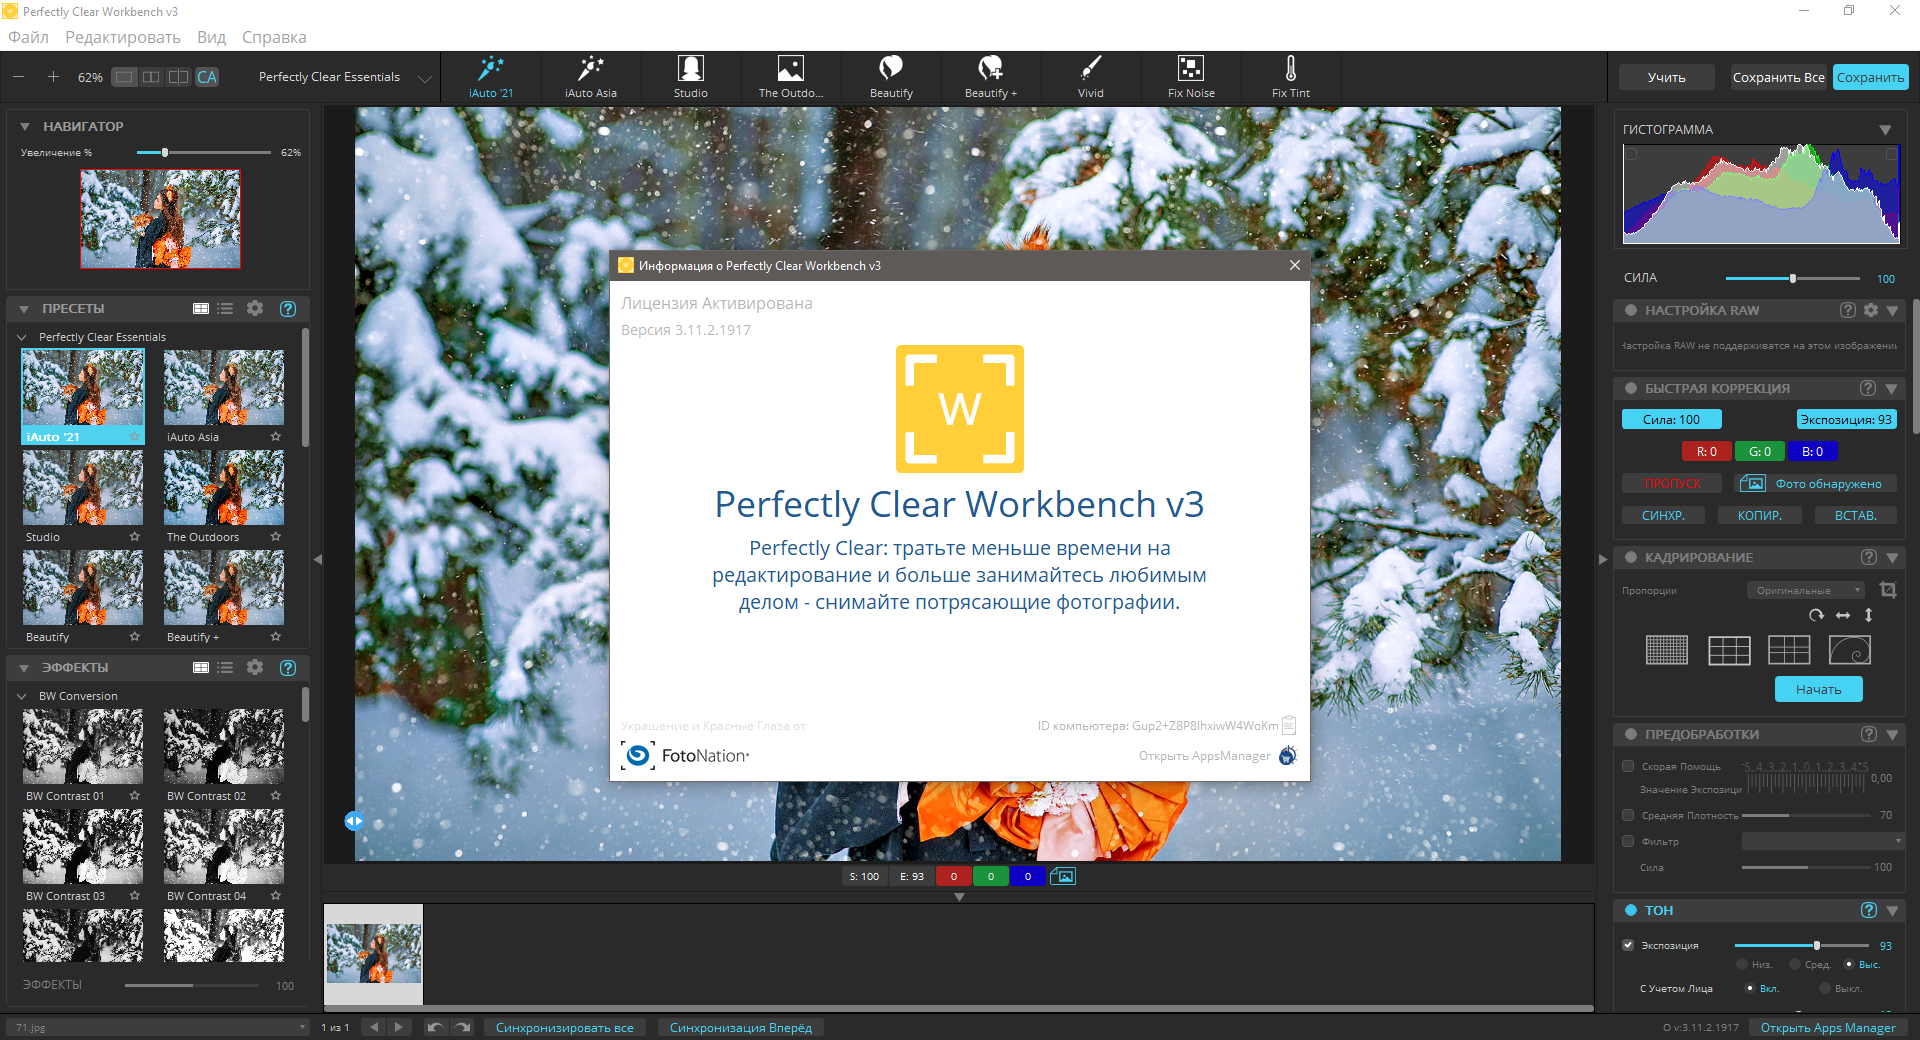 Perfectly clear. Perfectly Clear workbench. Athentech perfectly Clear workbench Kit. Perfectly Clear v3 3.6.3.1449. Perfectly Clear Video.